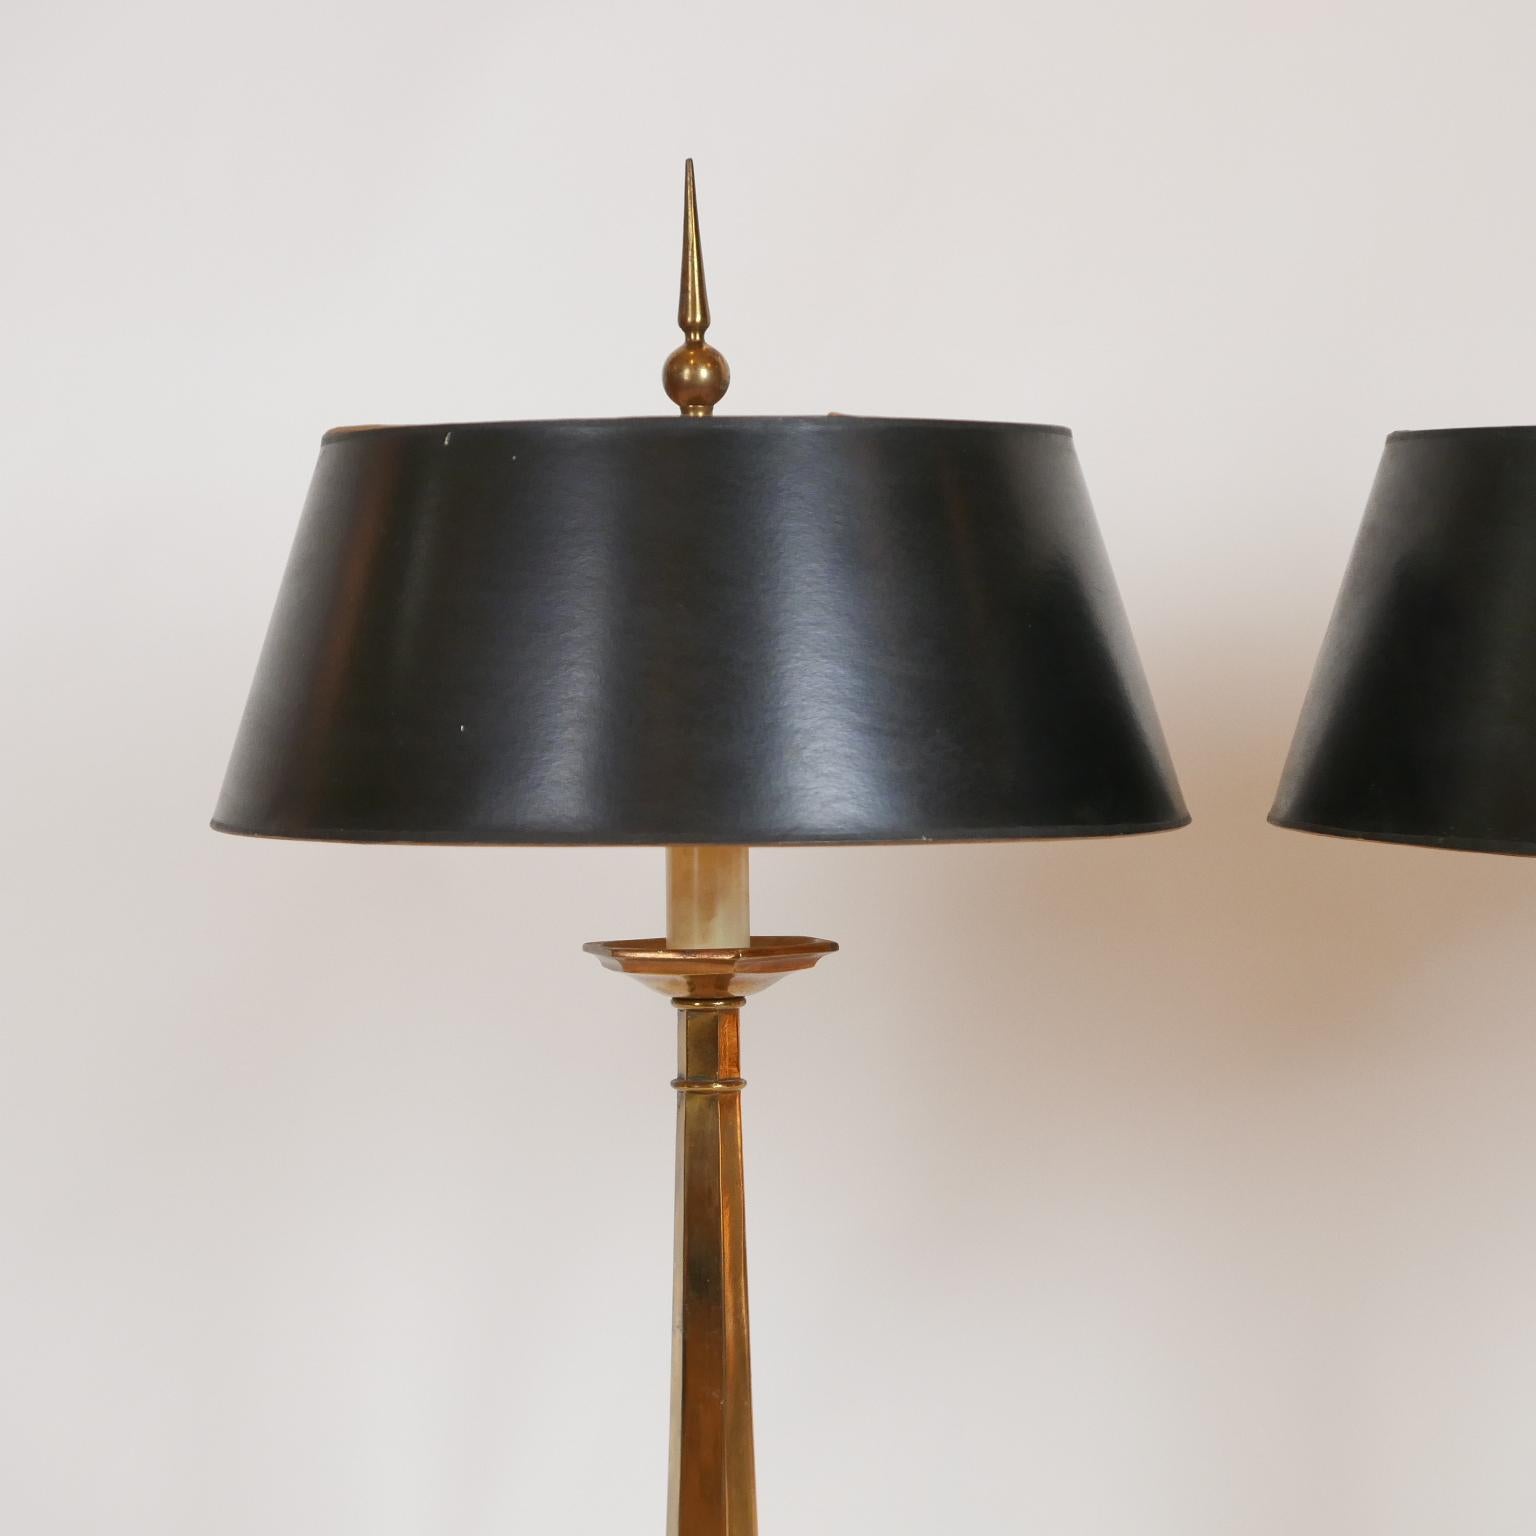 20th Century Pair of Frederick Cooper for Tyndale Decorative Brass Lamps with Finials, 1950s